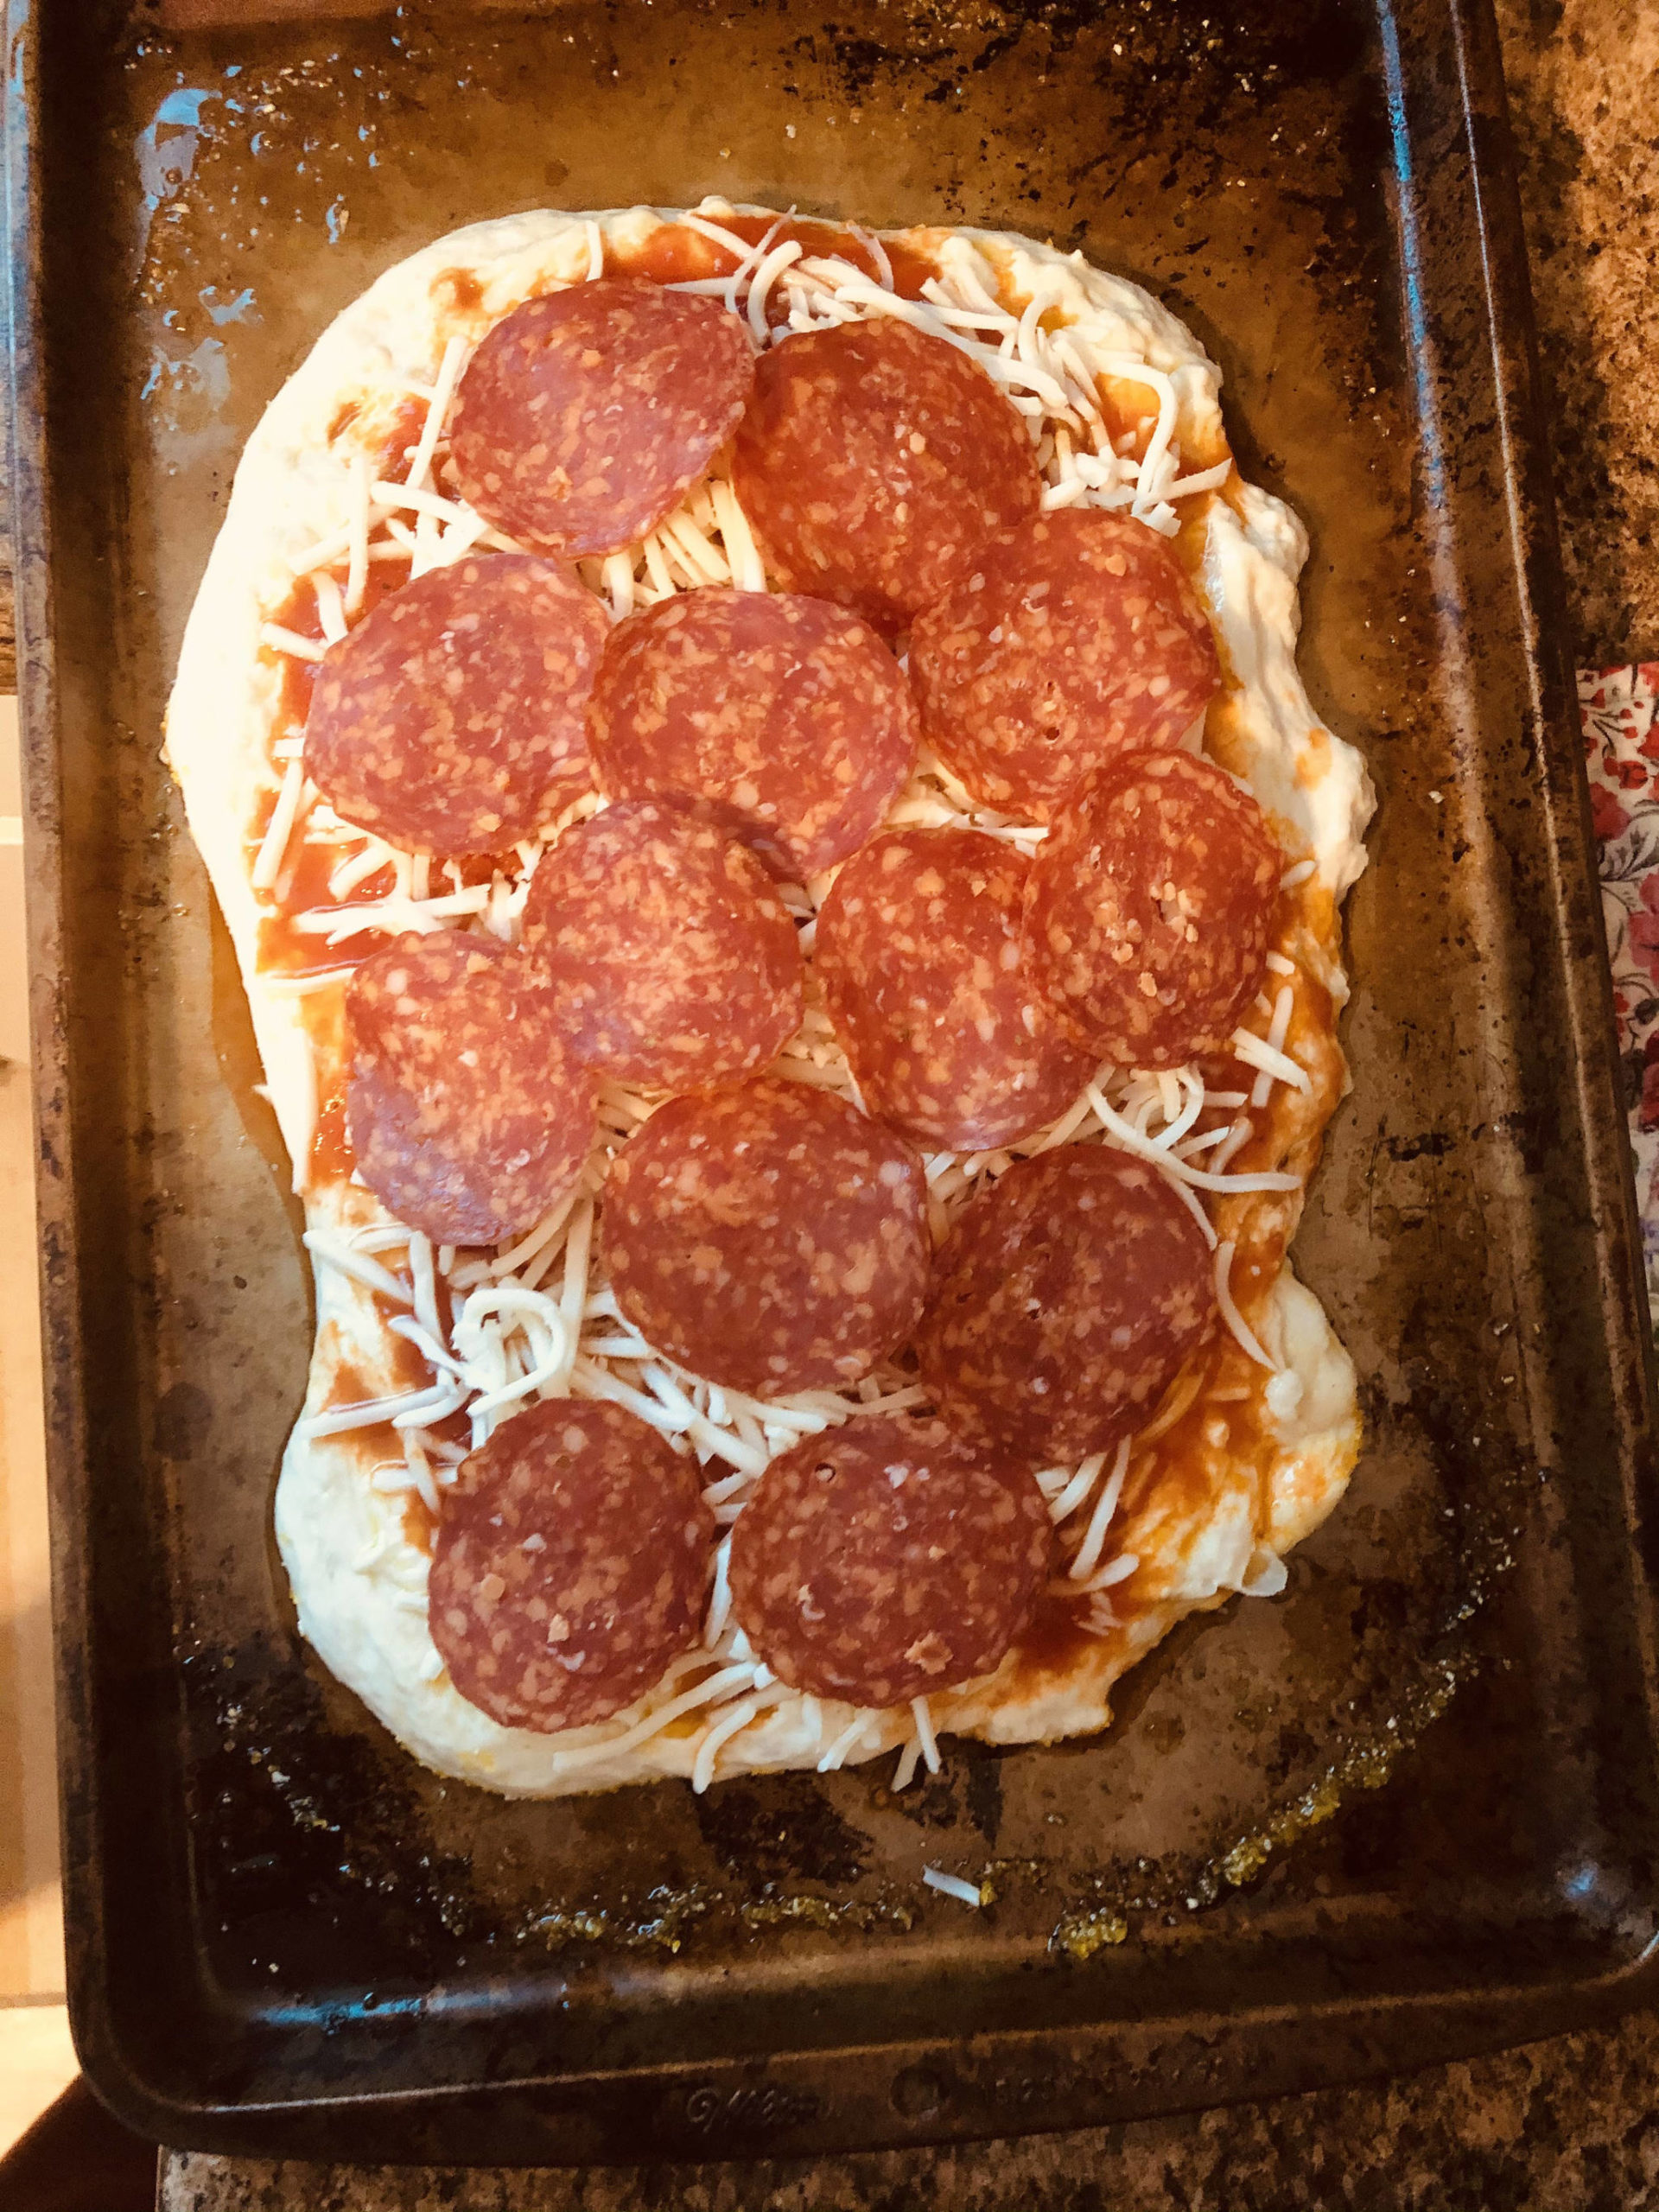 Pepperoni pizza ready to go into the oven, on Monday, Nov. 2, 2020, in Anchorage, Alaska. (Photo by Victoria Petersen/Peninsula Clarion)